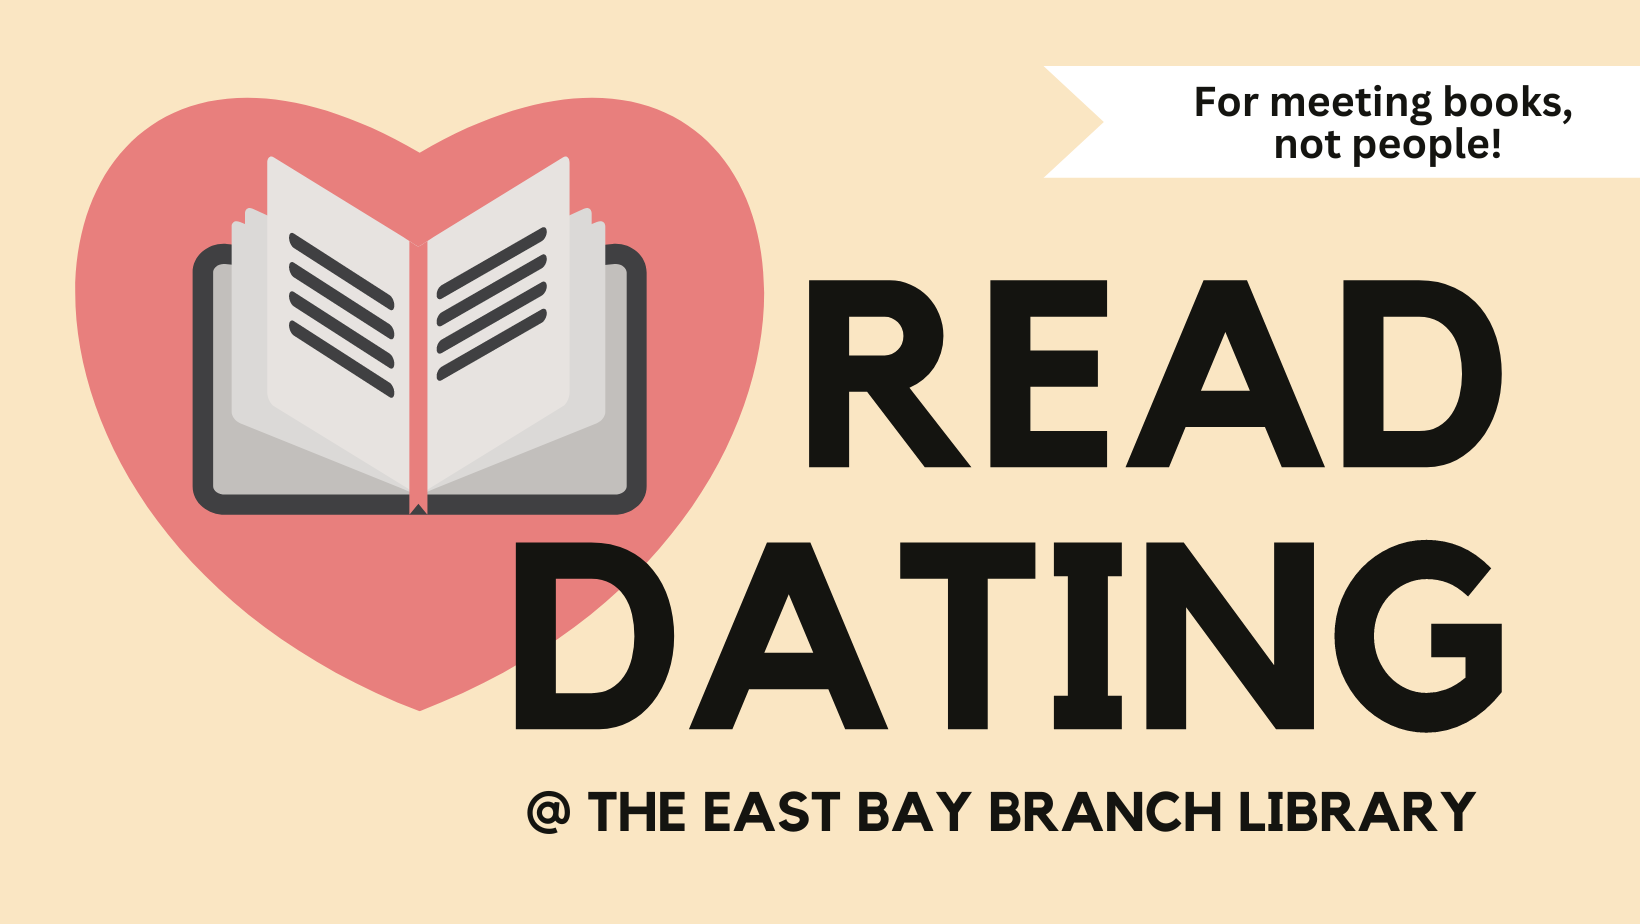 Read Dating at East Bay Branch Library. Book in a pink heart